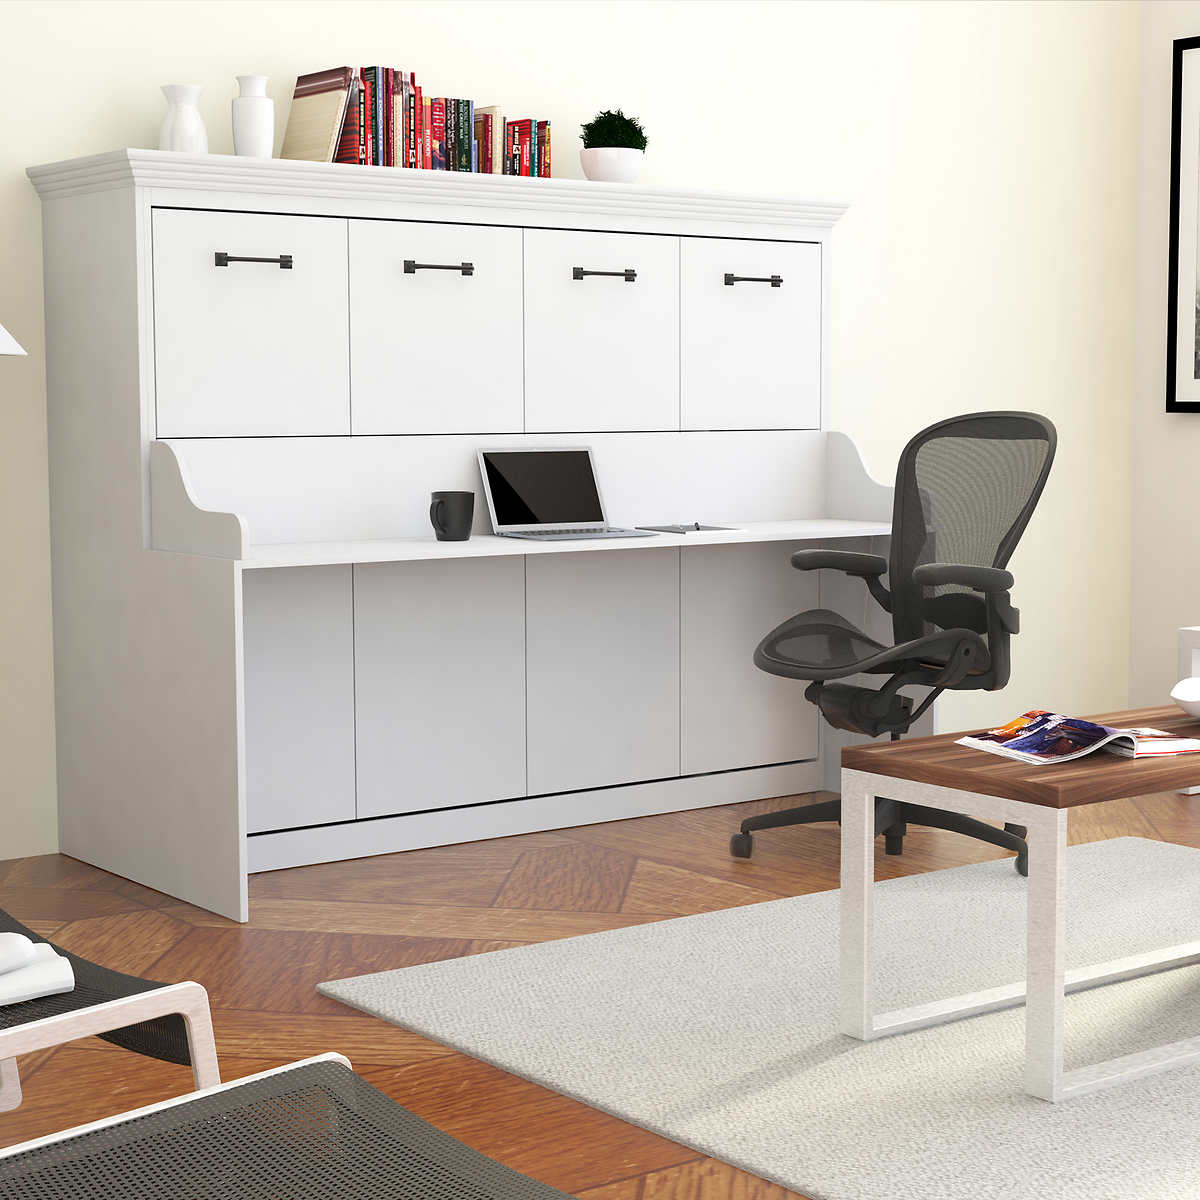 Melbourne Full Wall Bed With Desk Combo In White